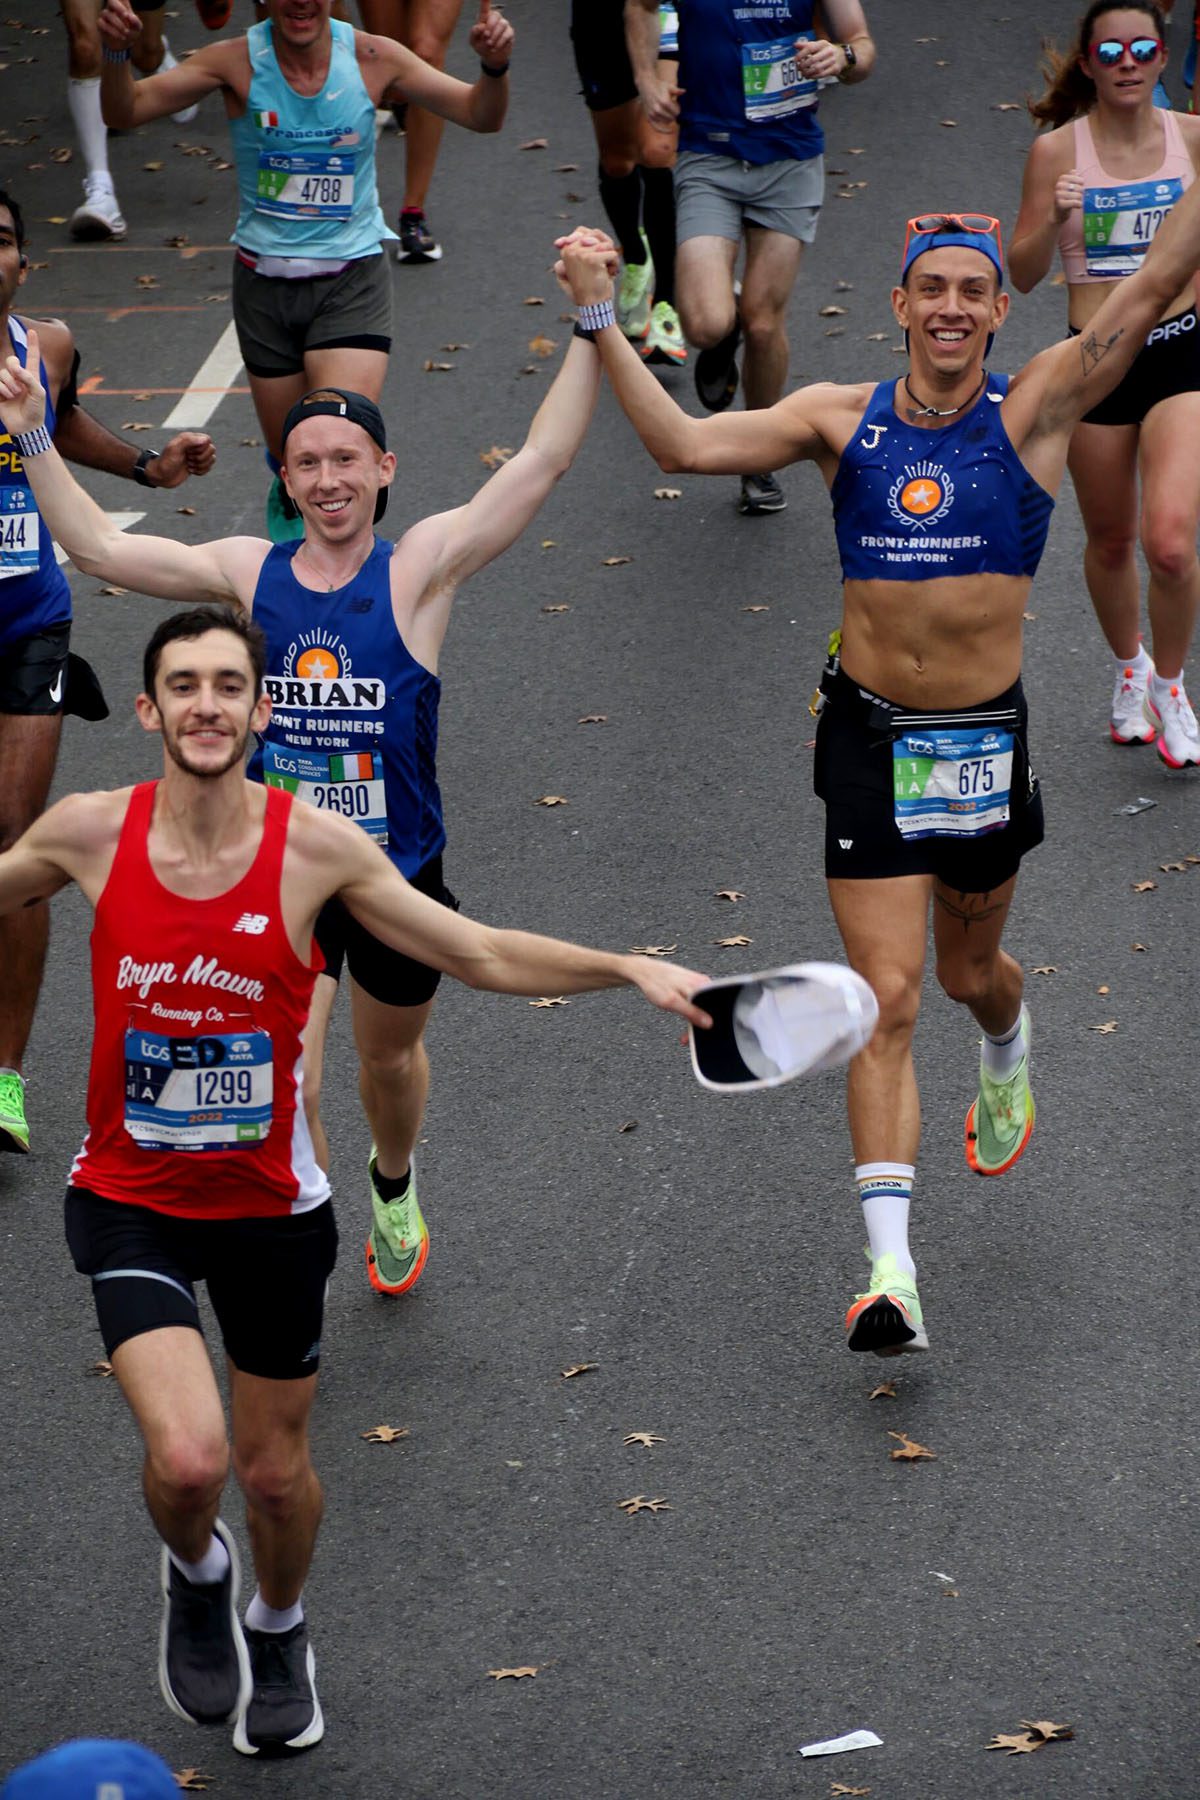 J Solle hold their teammate's hand while cheering at the NY marathon.